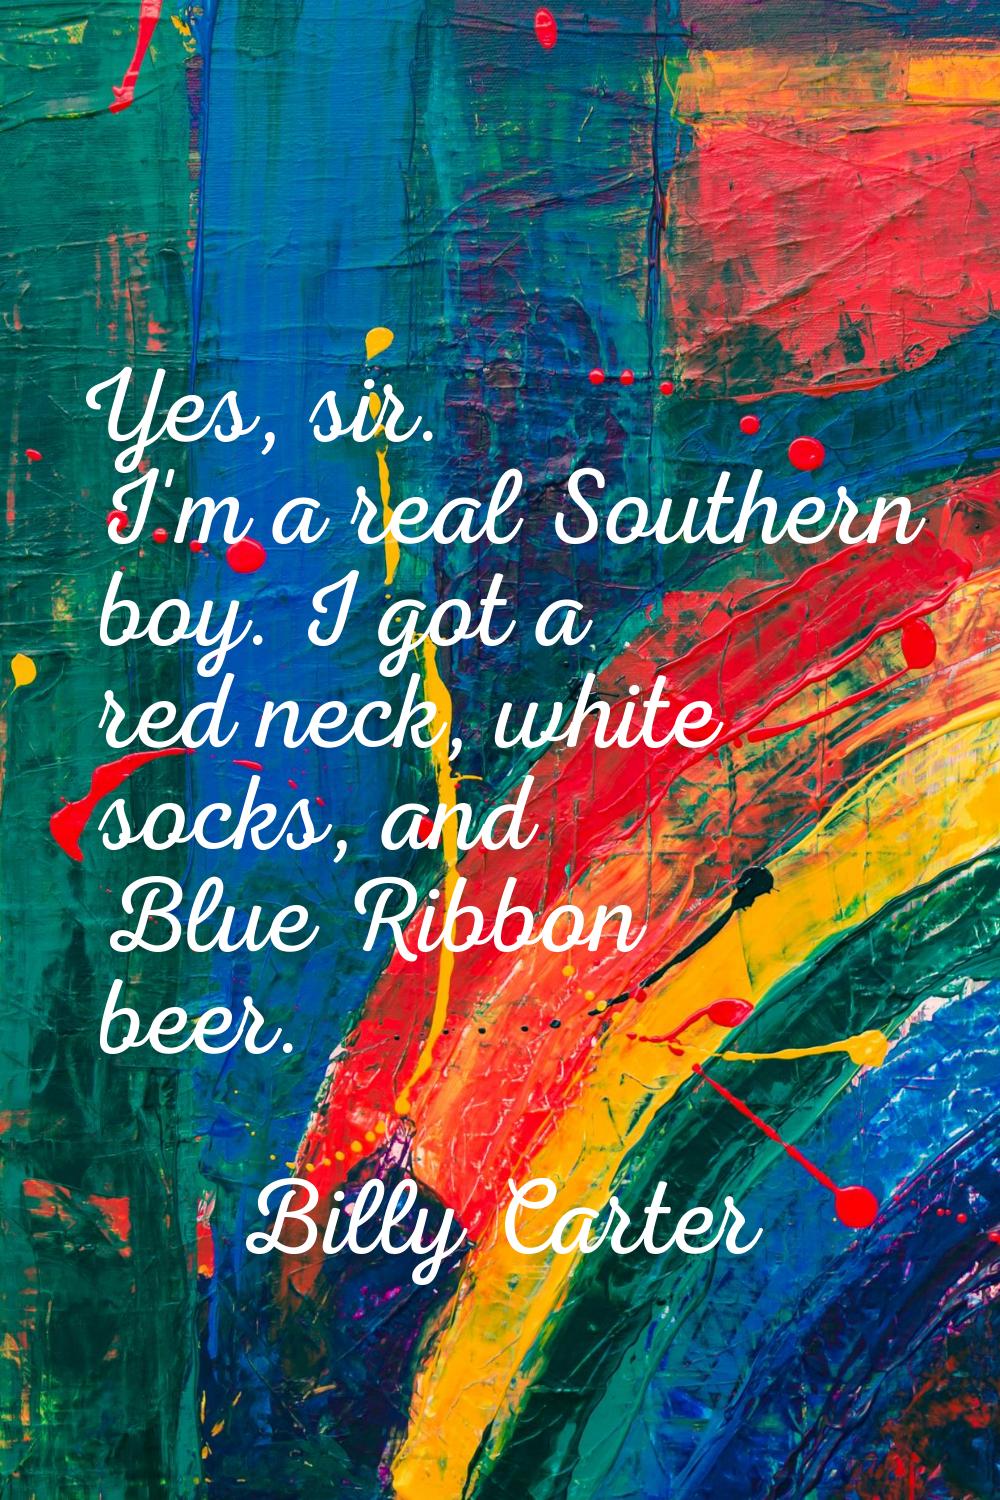 Yes, sir. I'm a real Southern boy. I got a red neck, white socks, and Blue Ribbon beer.